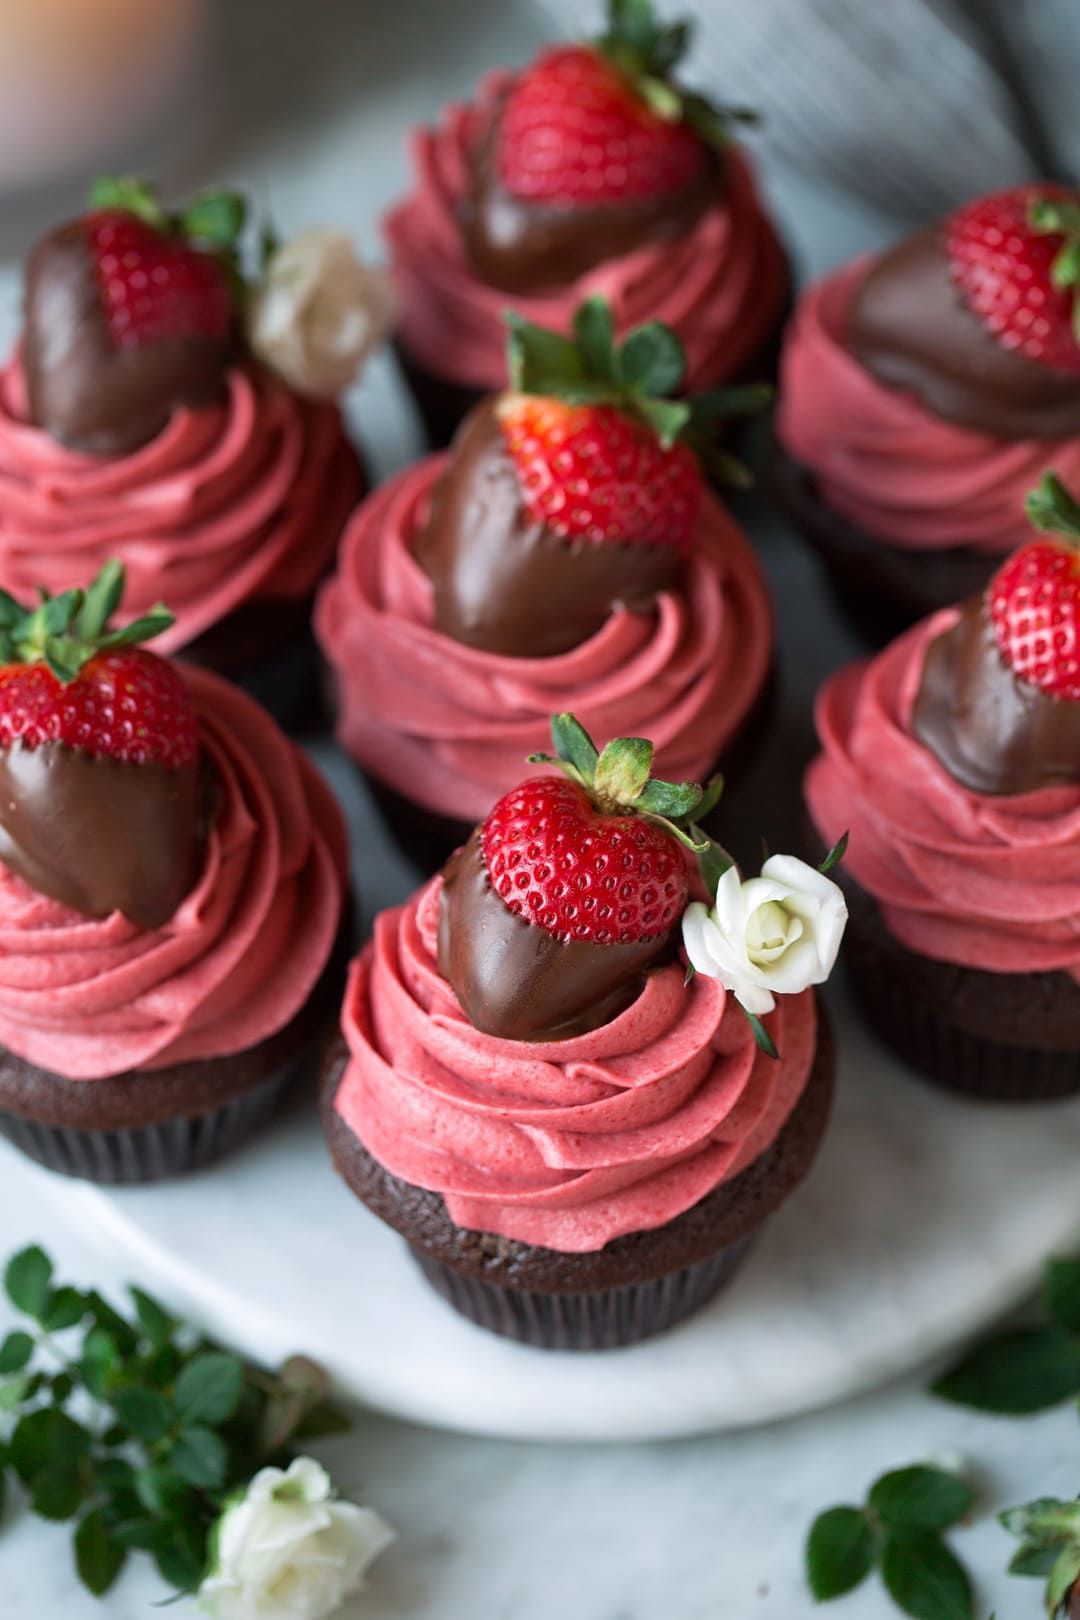 The 11 Best Cupcake Recipes -   14 cup cake Strawberry ideas